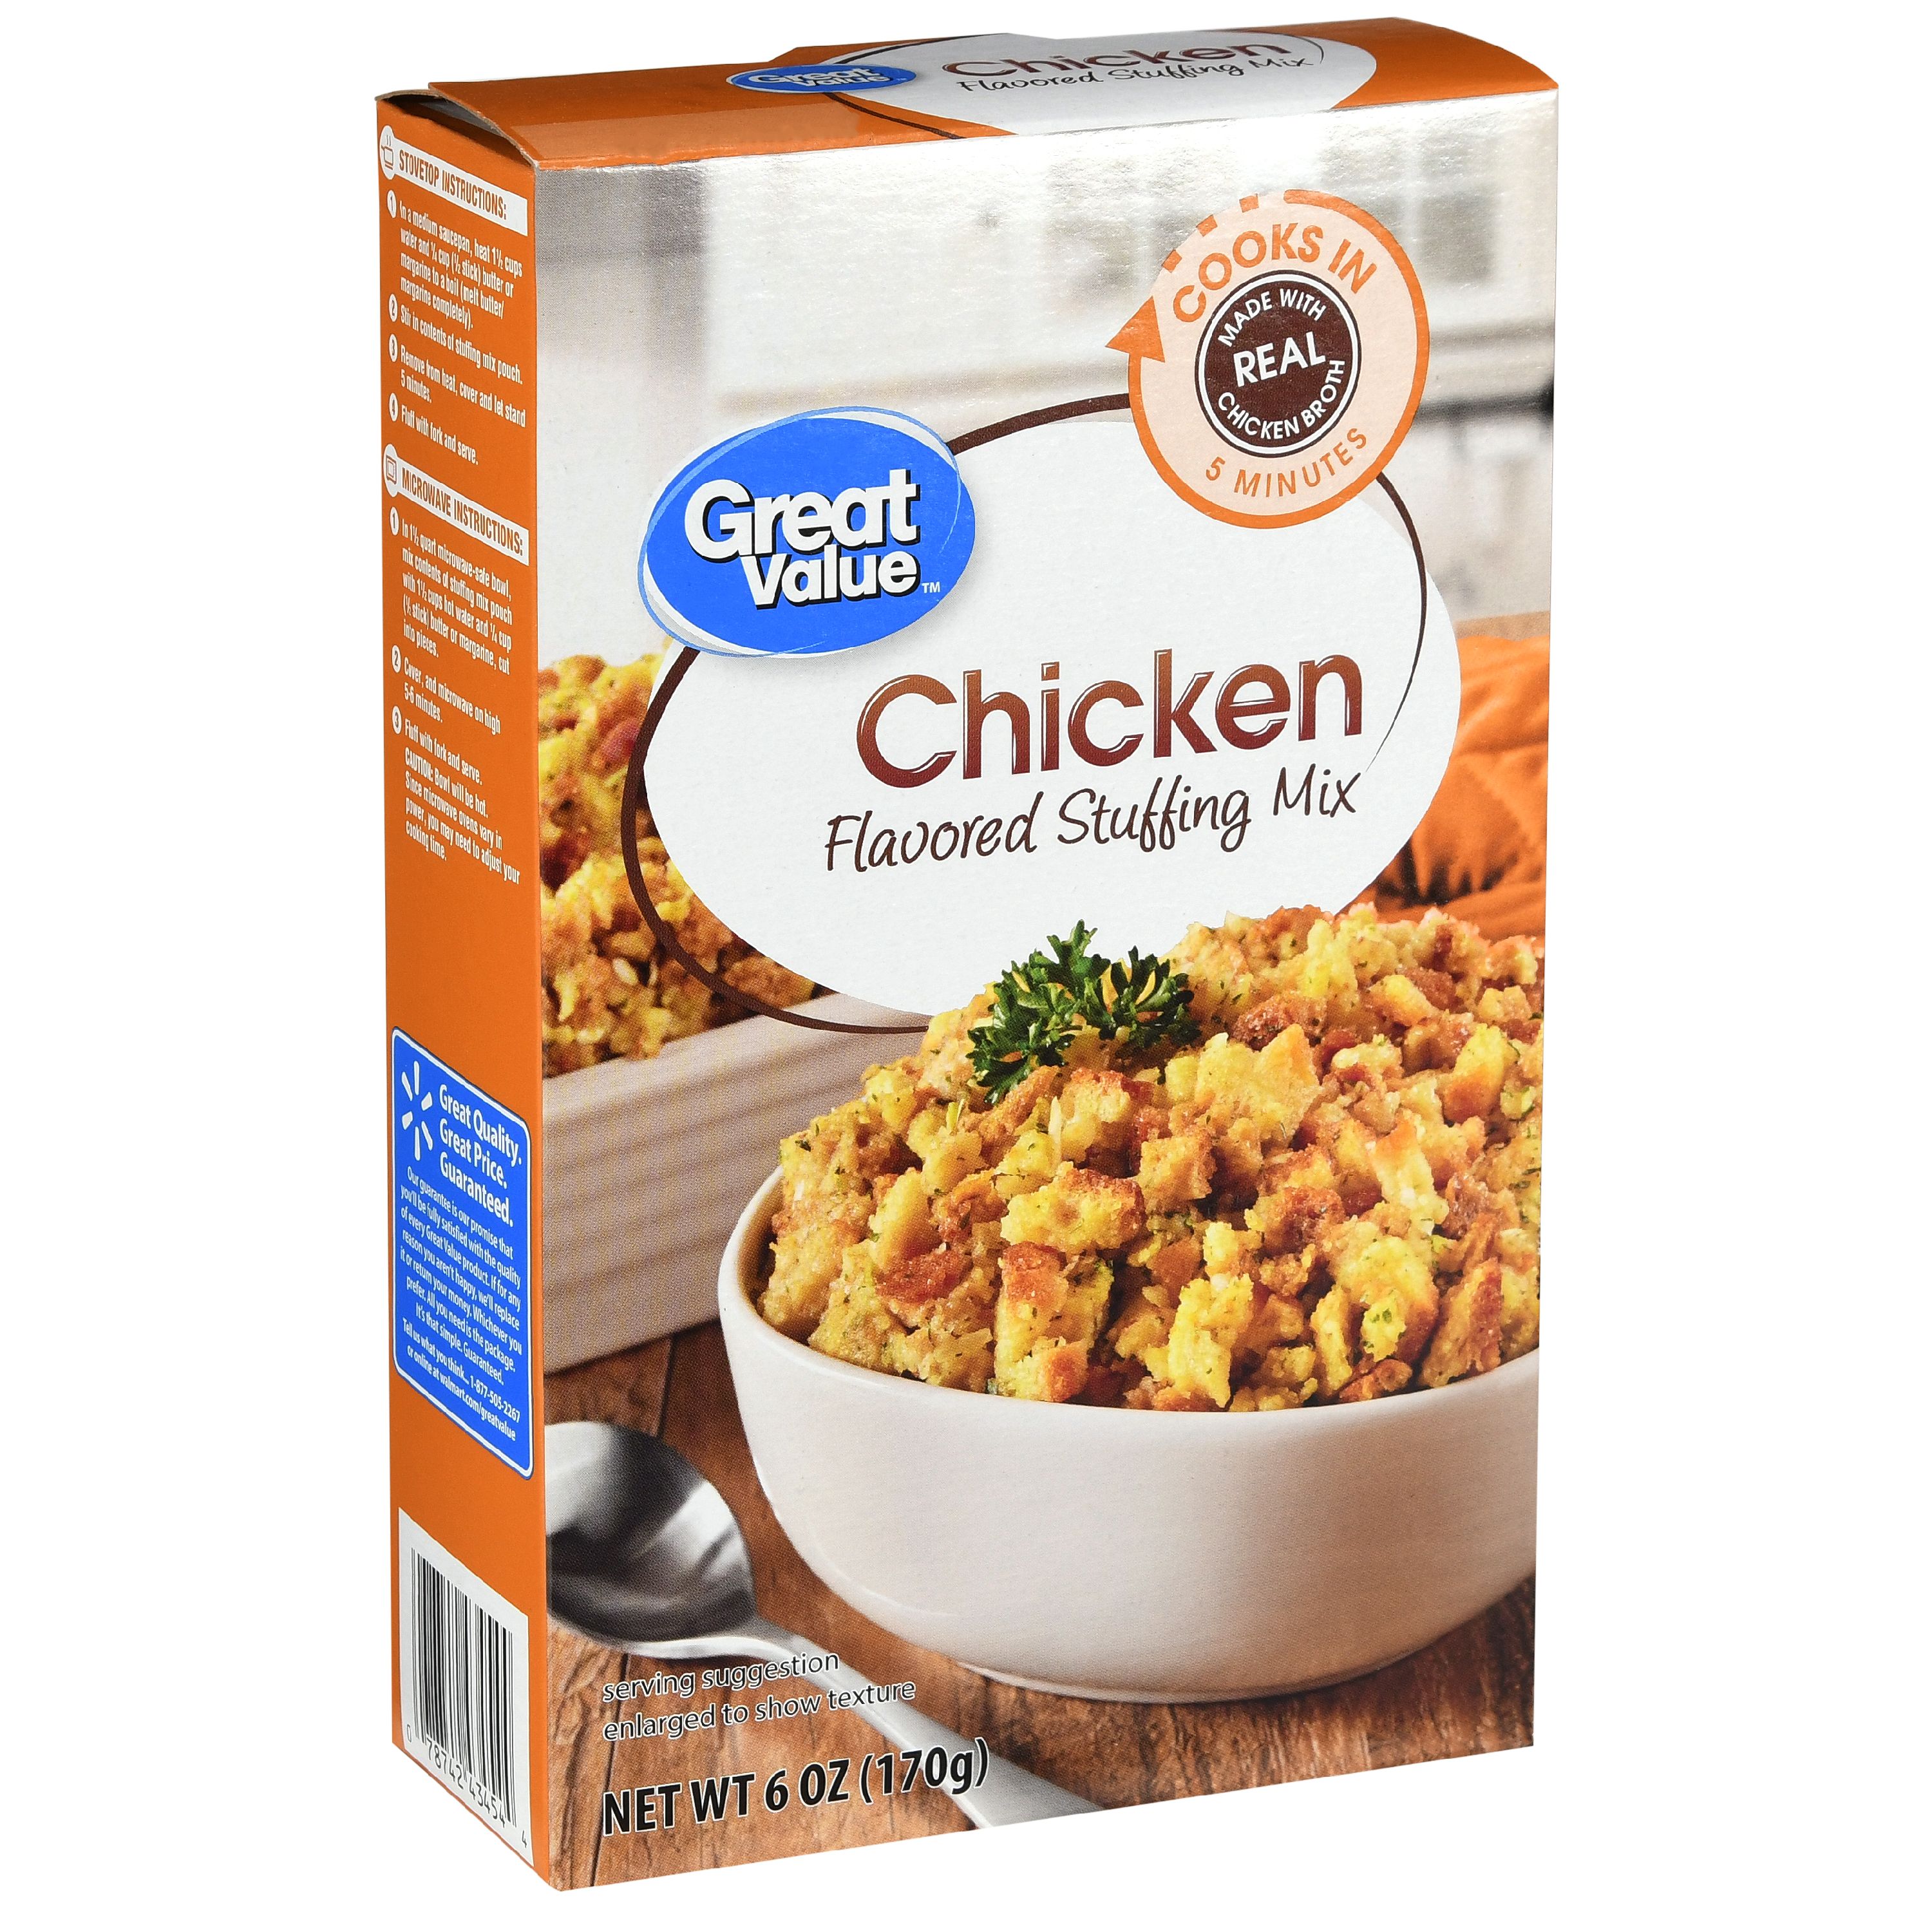 Great Value Chicken-Flavored Stuffing Mix, 6 Oz Image